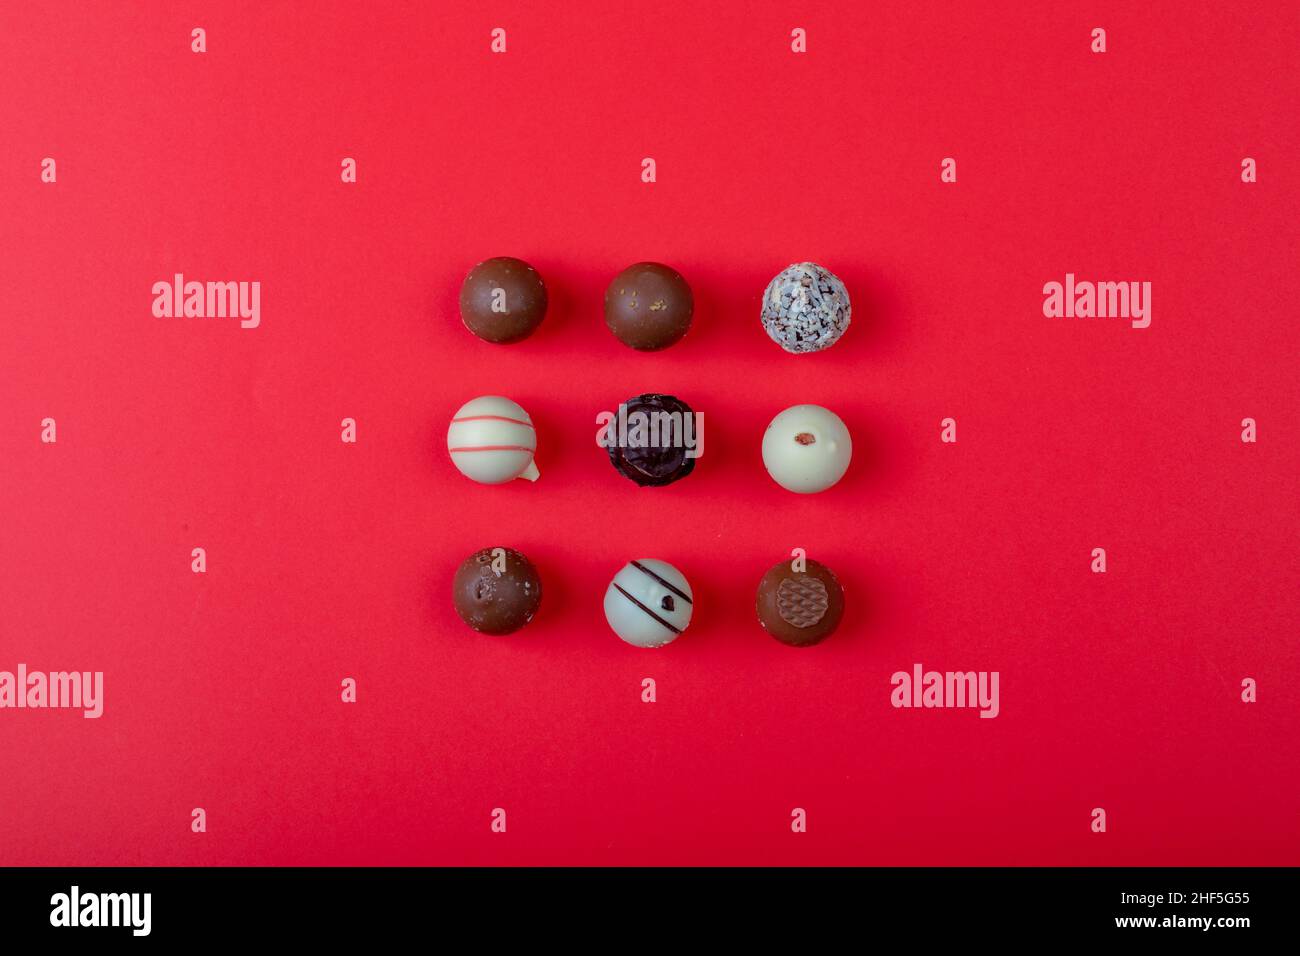 Overhead view of different chocolate spheres arranged on red background with copy space Stock Photo